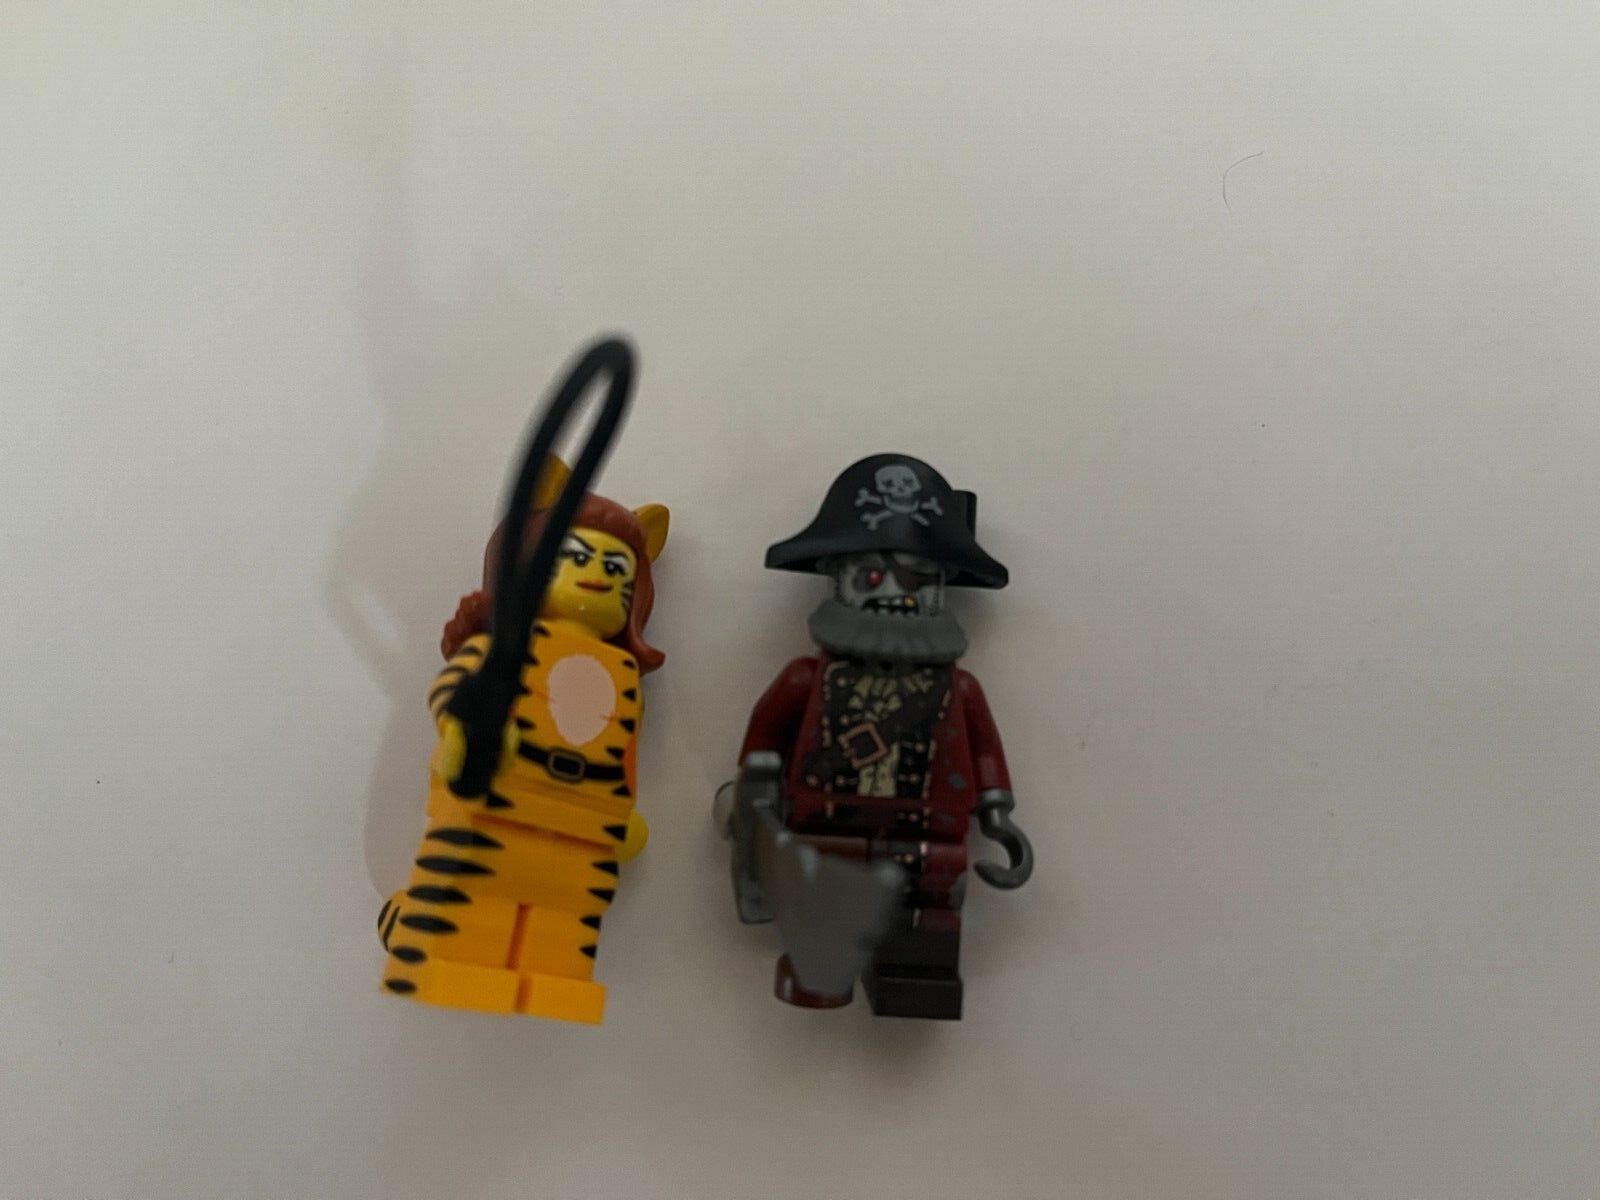 Tiger woman & Pirate Lego minifigures monsters series 14